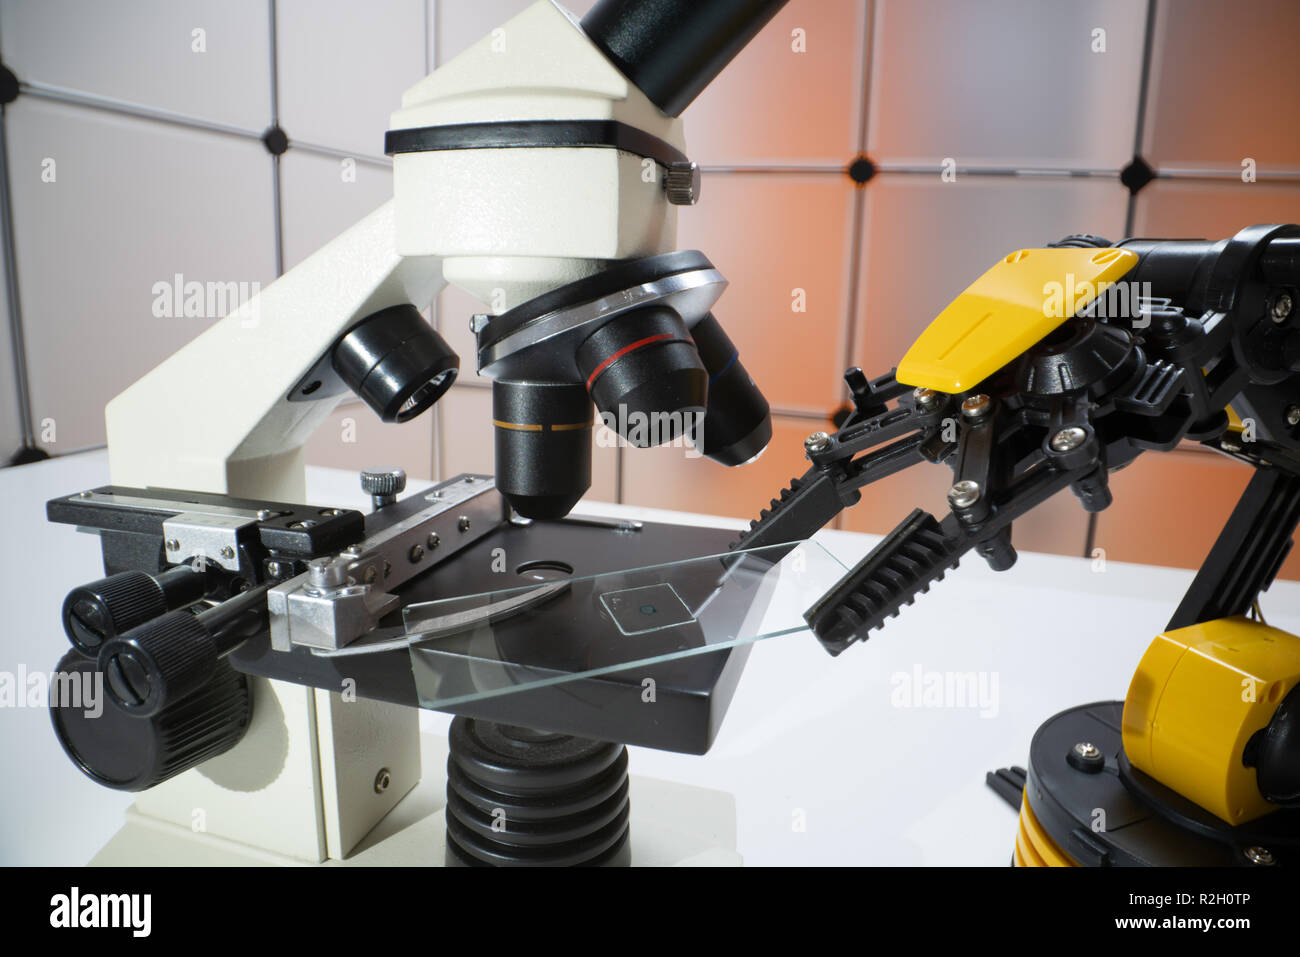 Microscope slide in robot arm and science microscope Stock Photo - Alamy